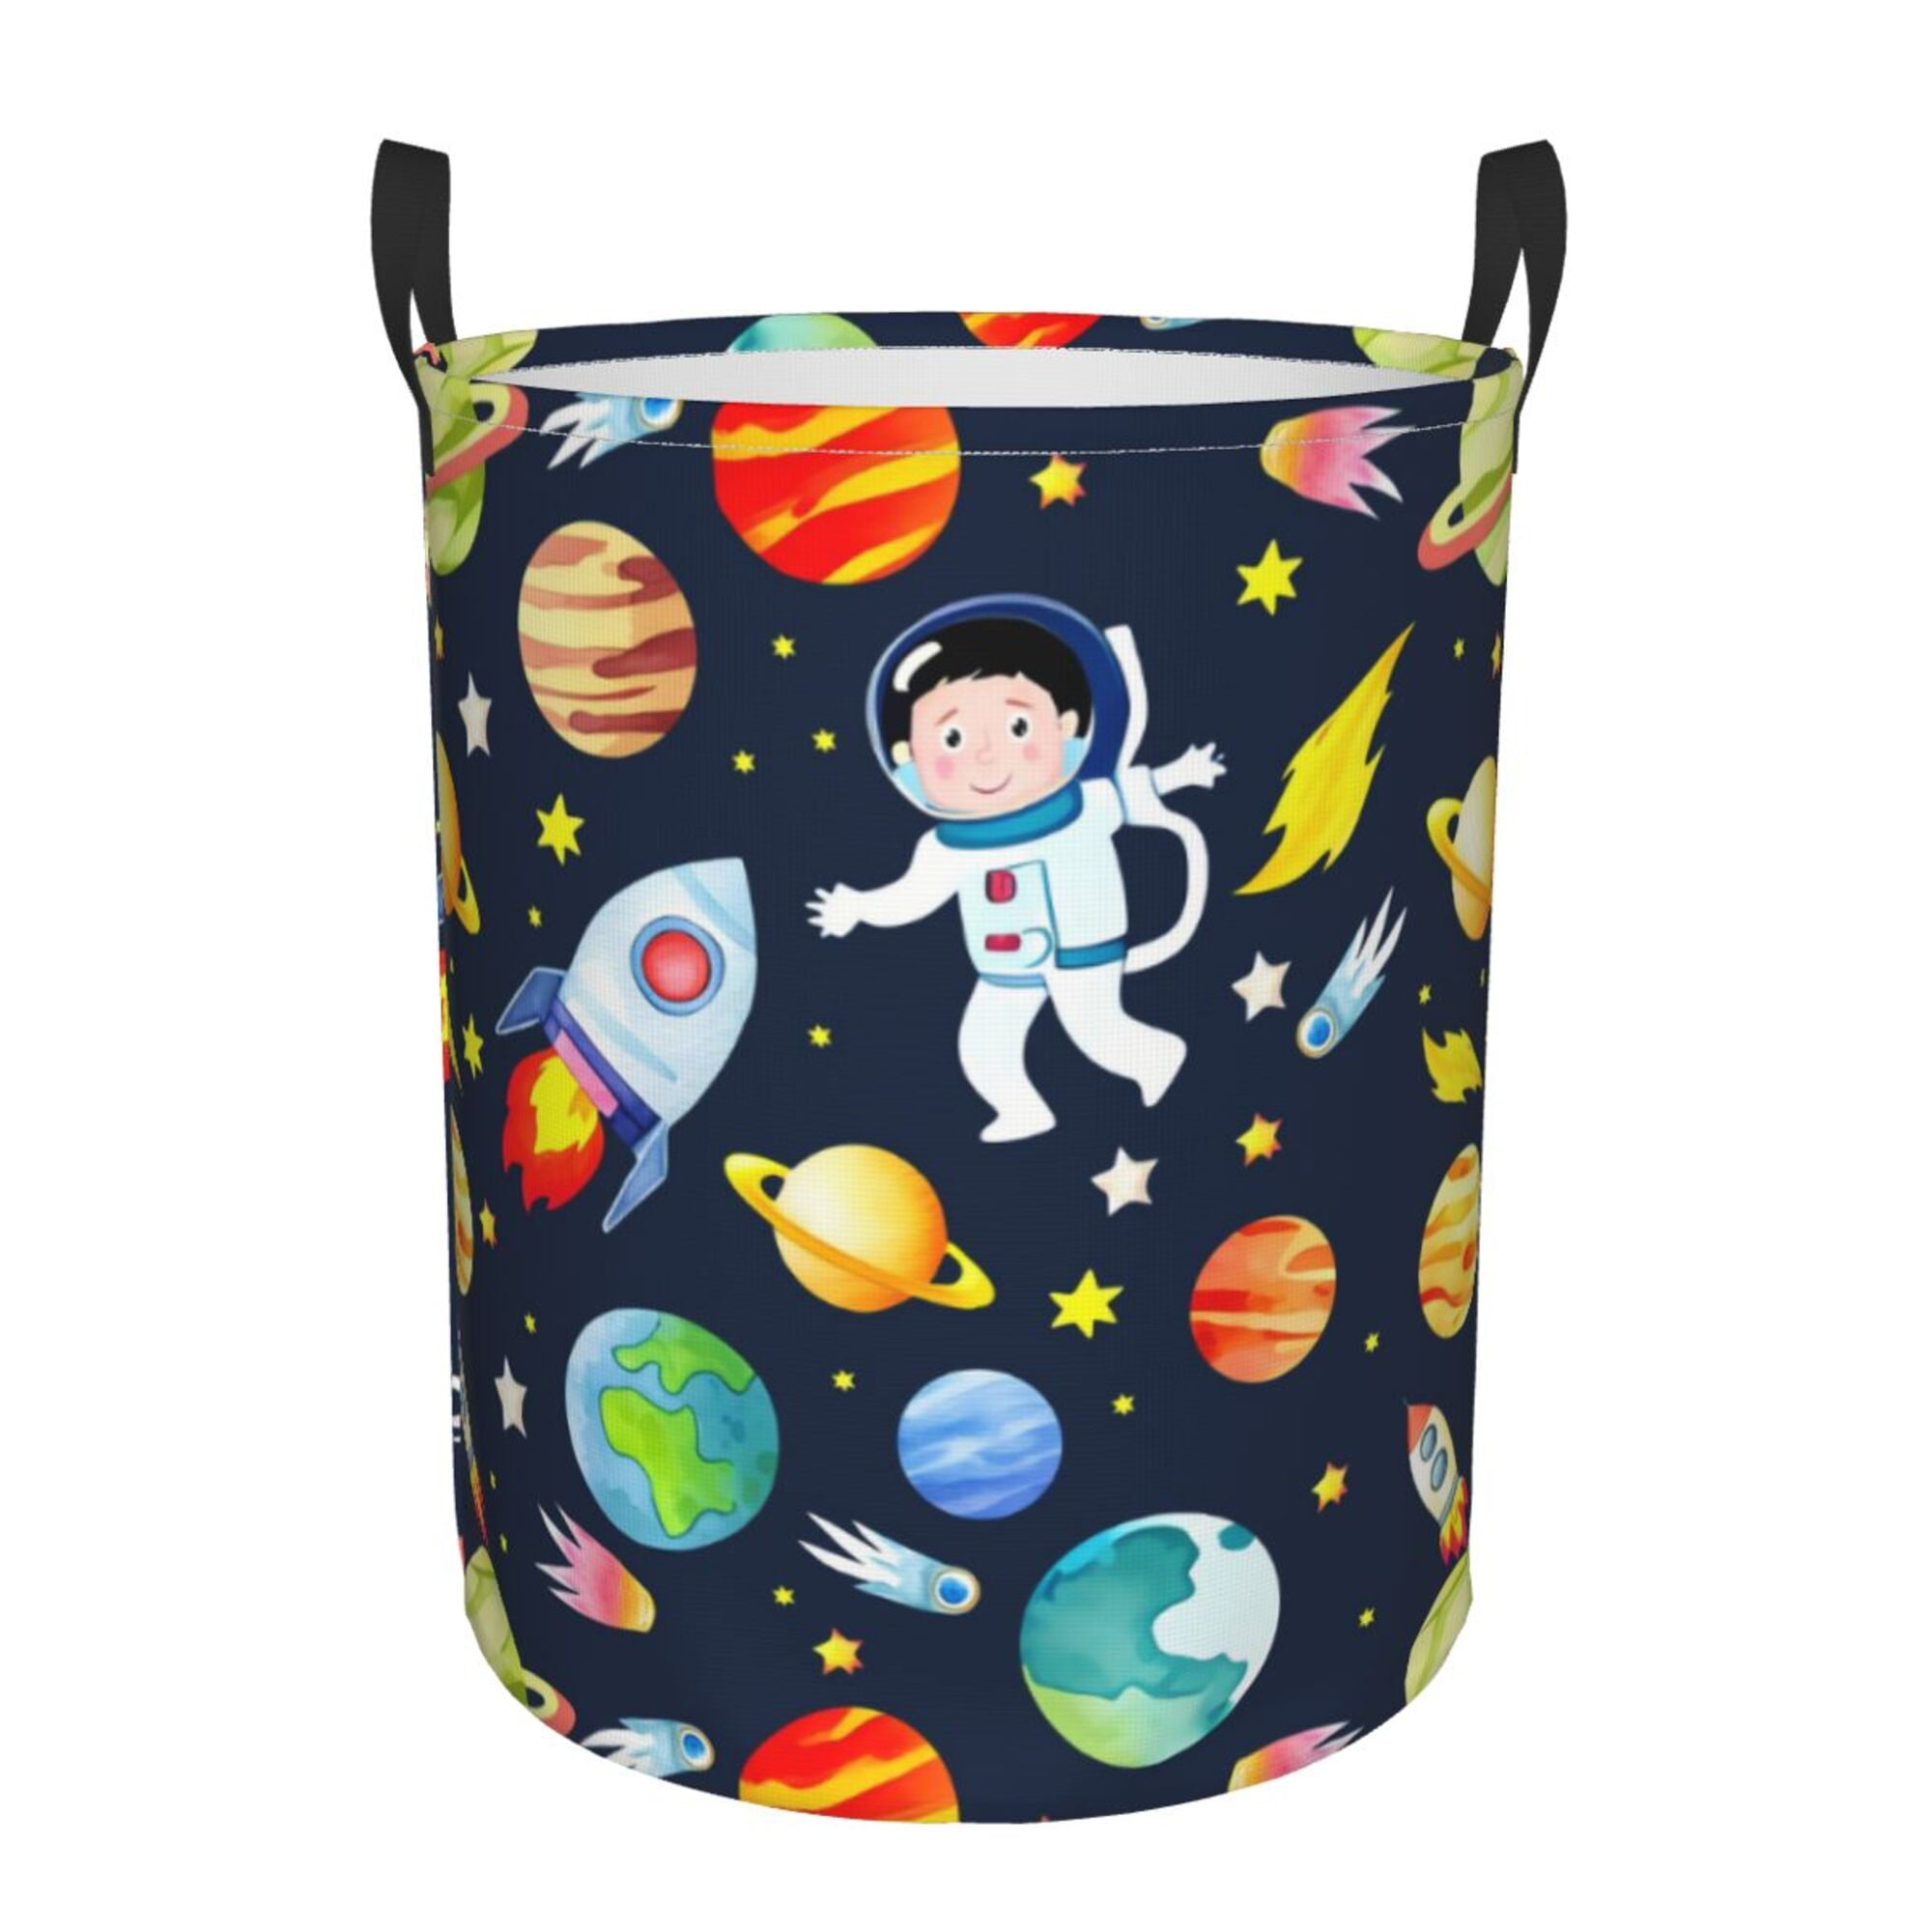 DouZhe Waterproof Collapsible Large Laundry Baskets, Space Rocket ...